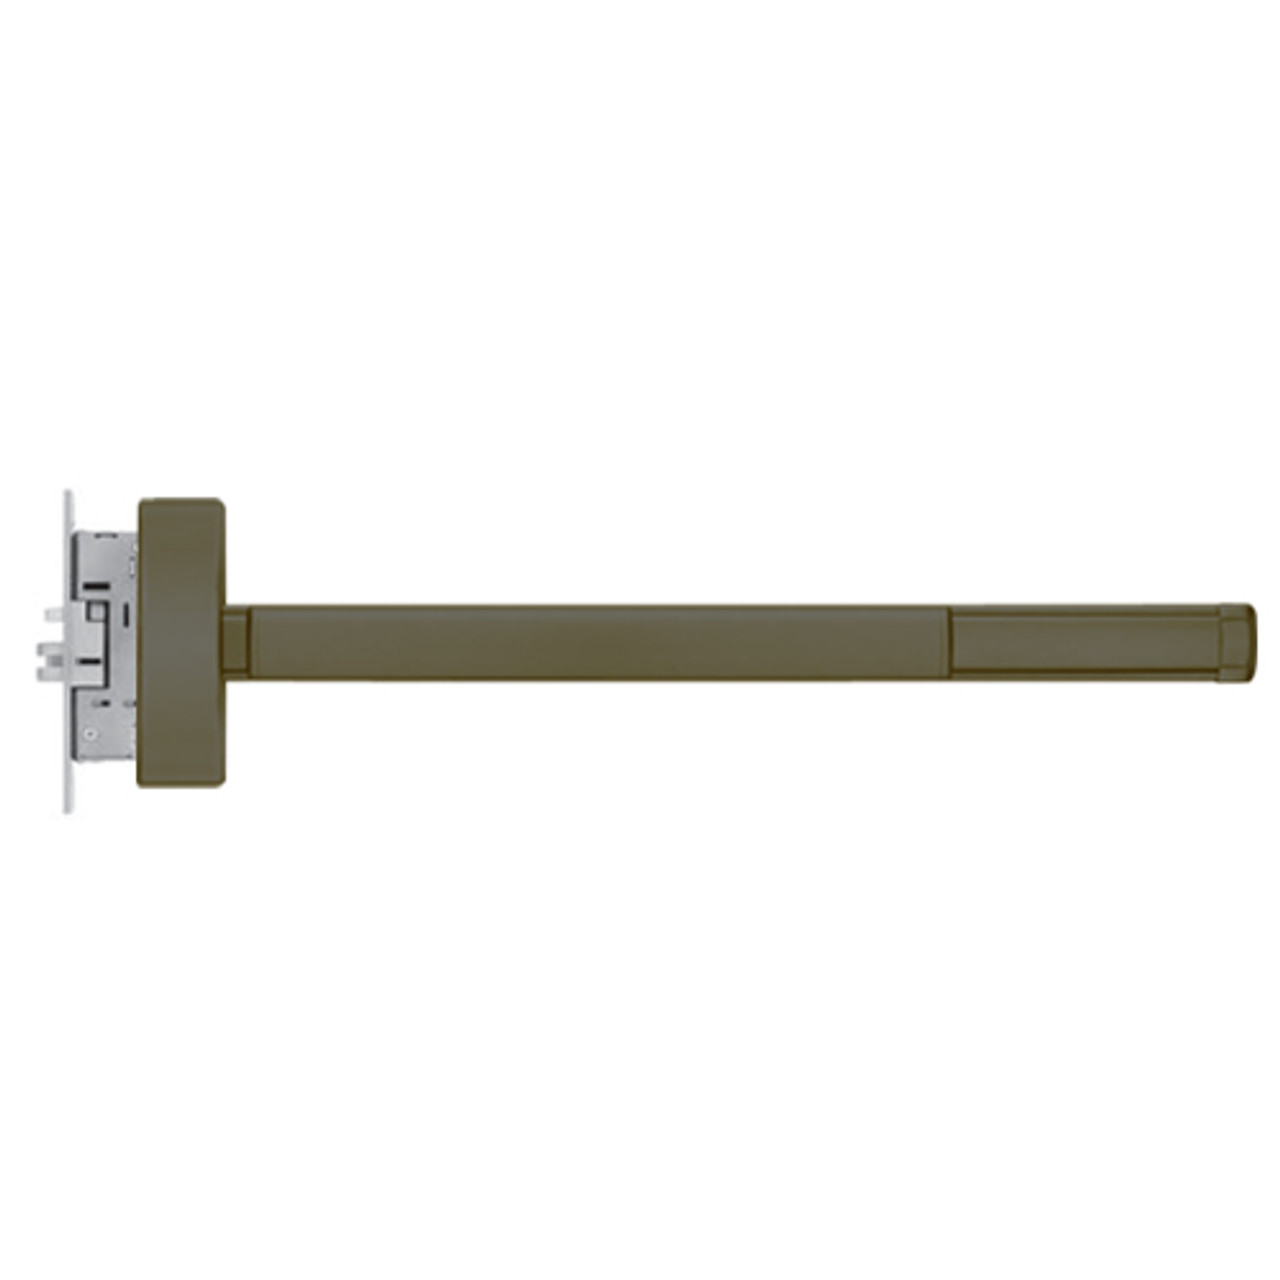 TSFL2314-RHR-613-36 PHI 2300 Series Fire Rated Apex Mortise Exit Device with Touchbar Monitoring Switch Prepped for Lever-Knob Always Active in Oil Rubbed Bronze Finish